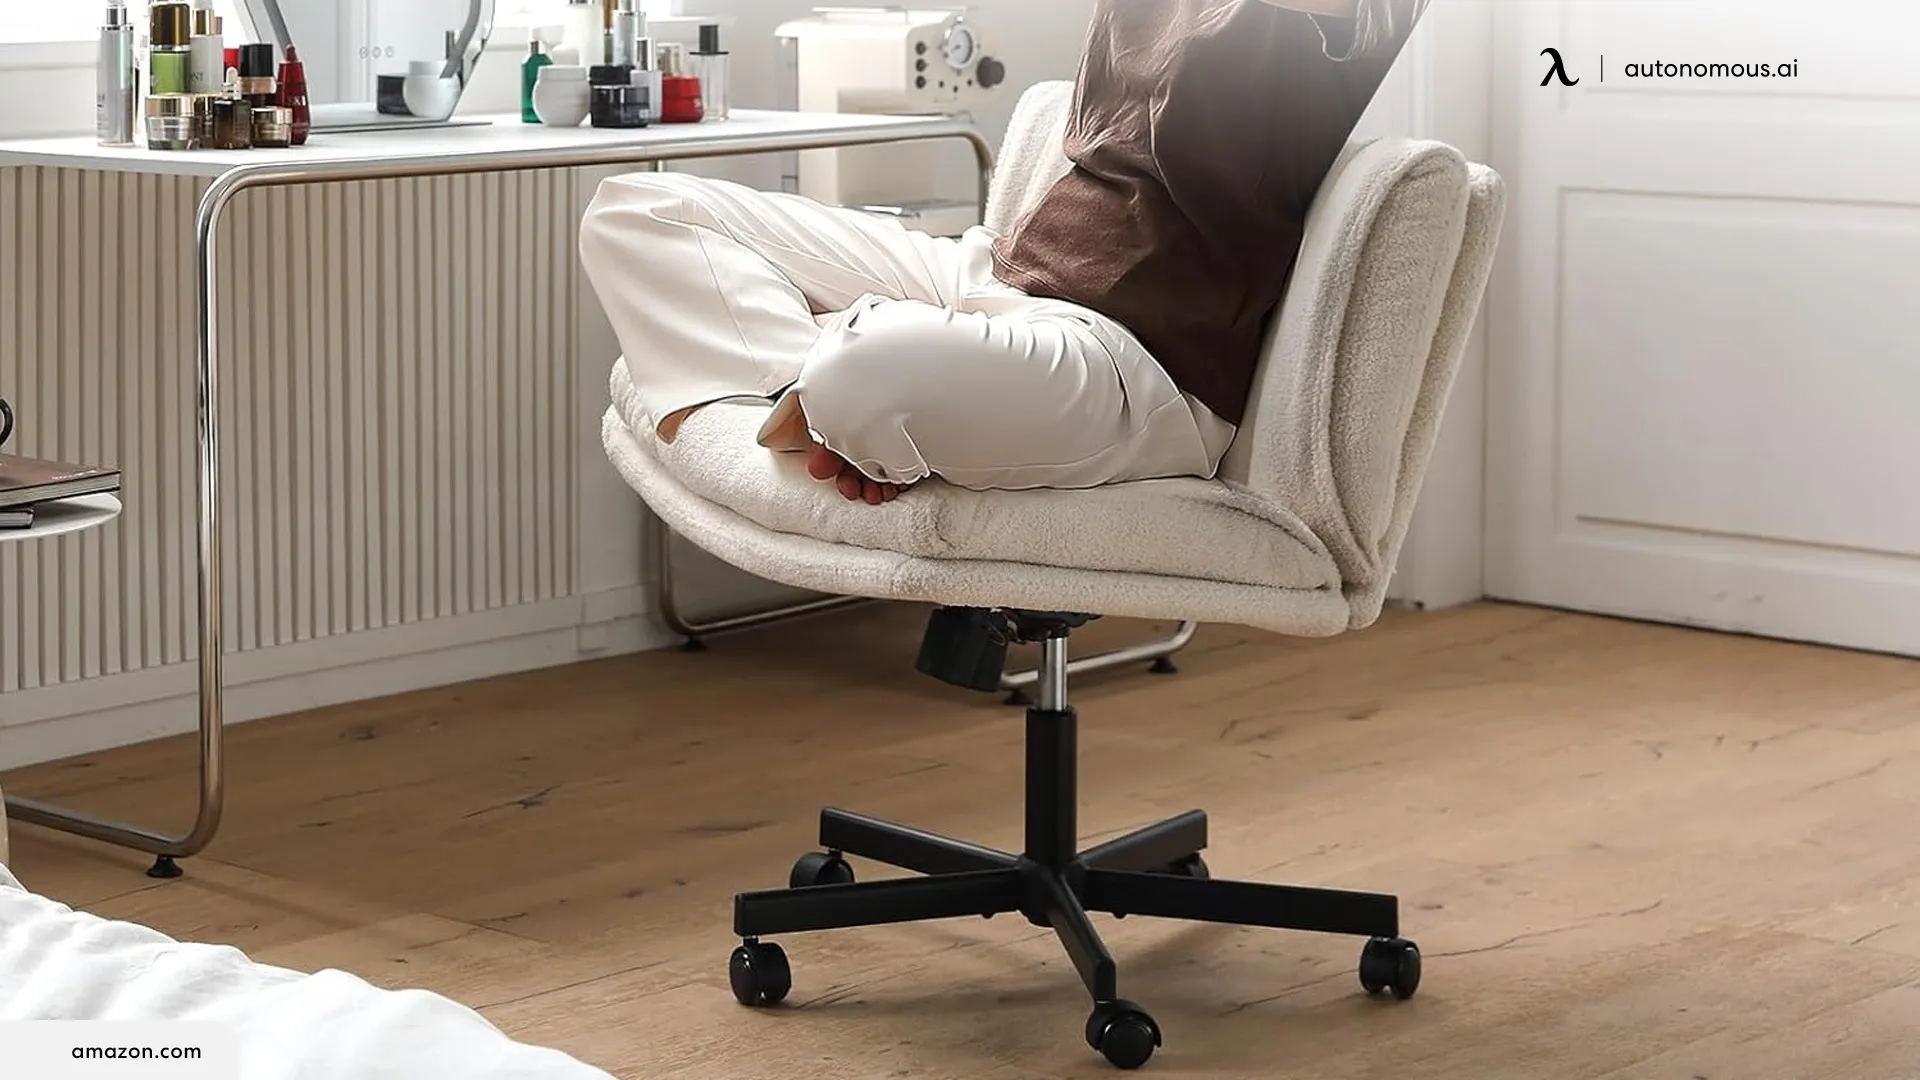 Top Cross-legged Office Chair with Wheels for All-day Comfort